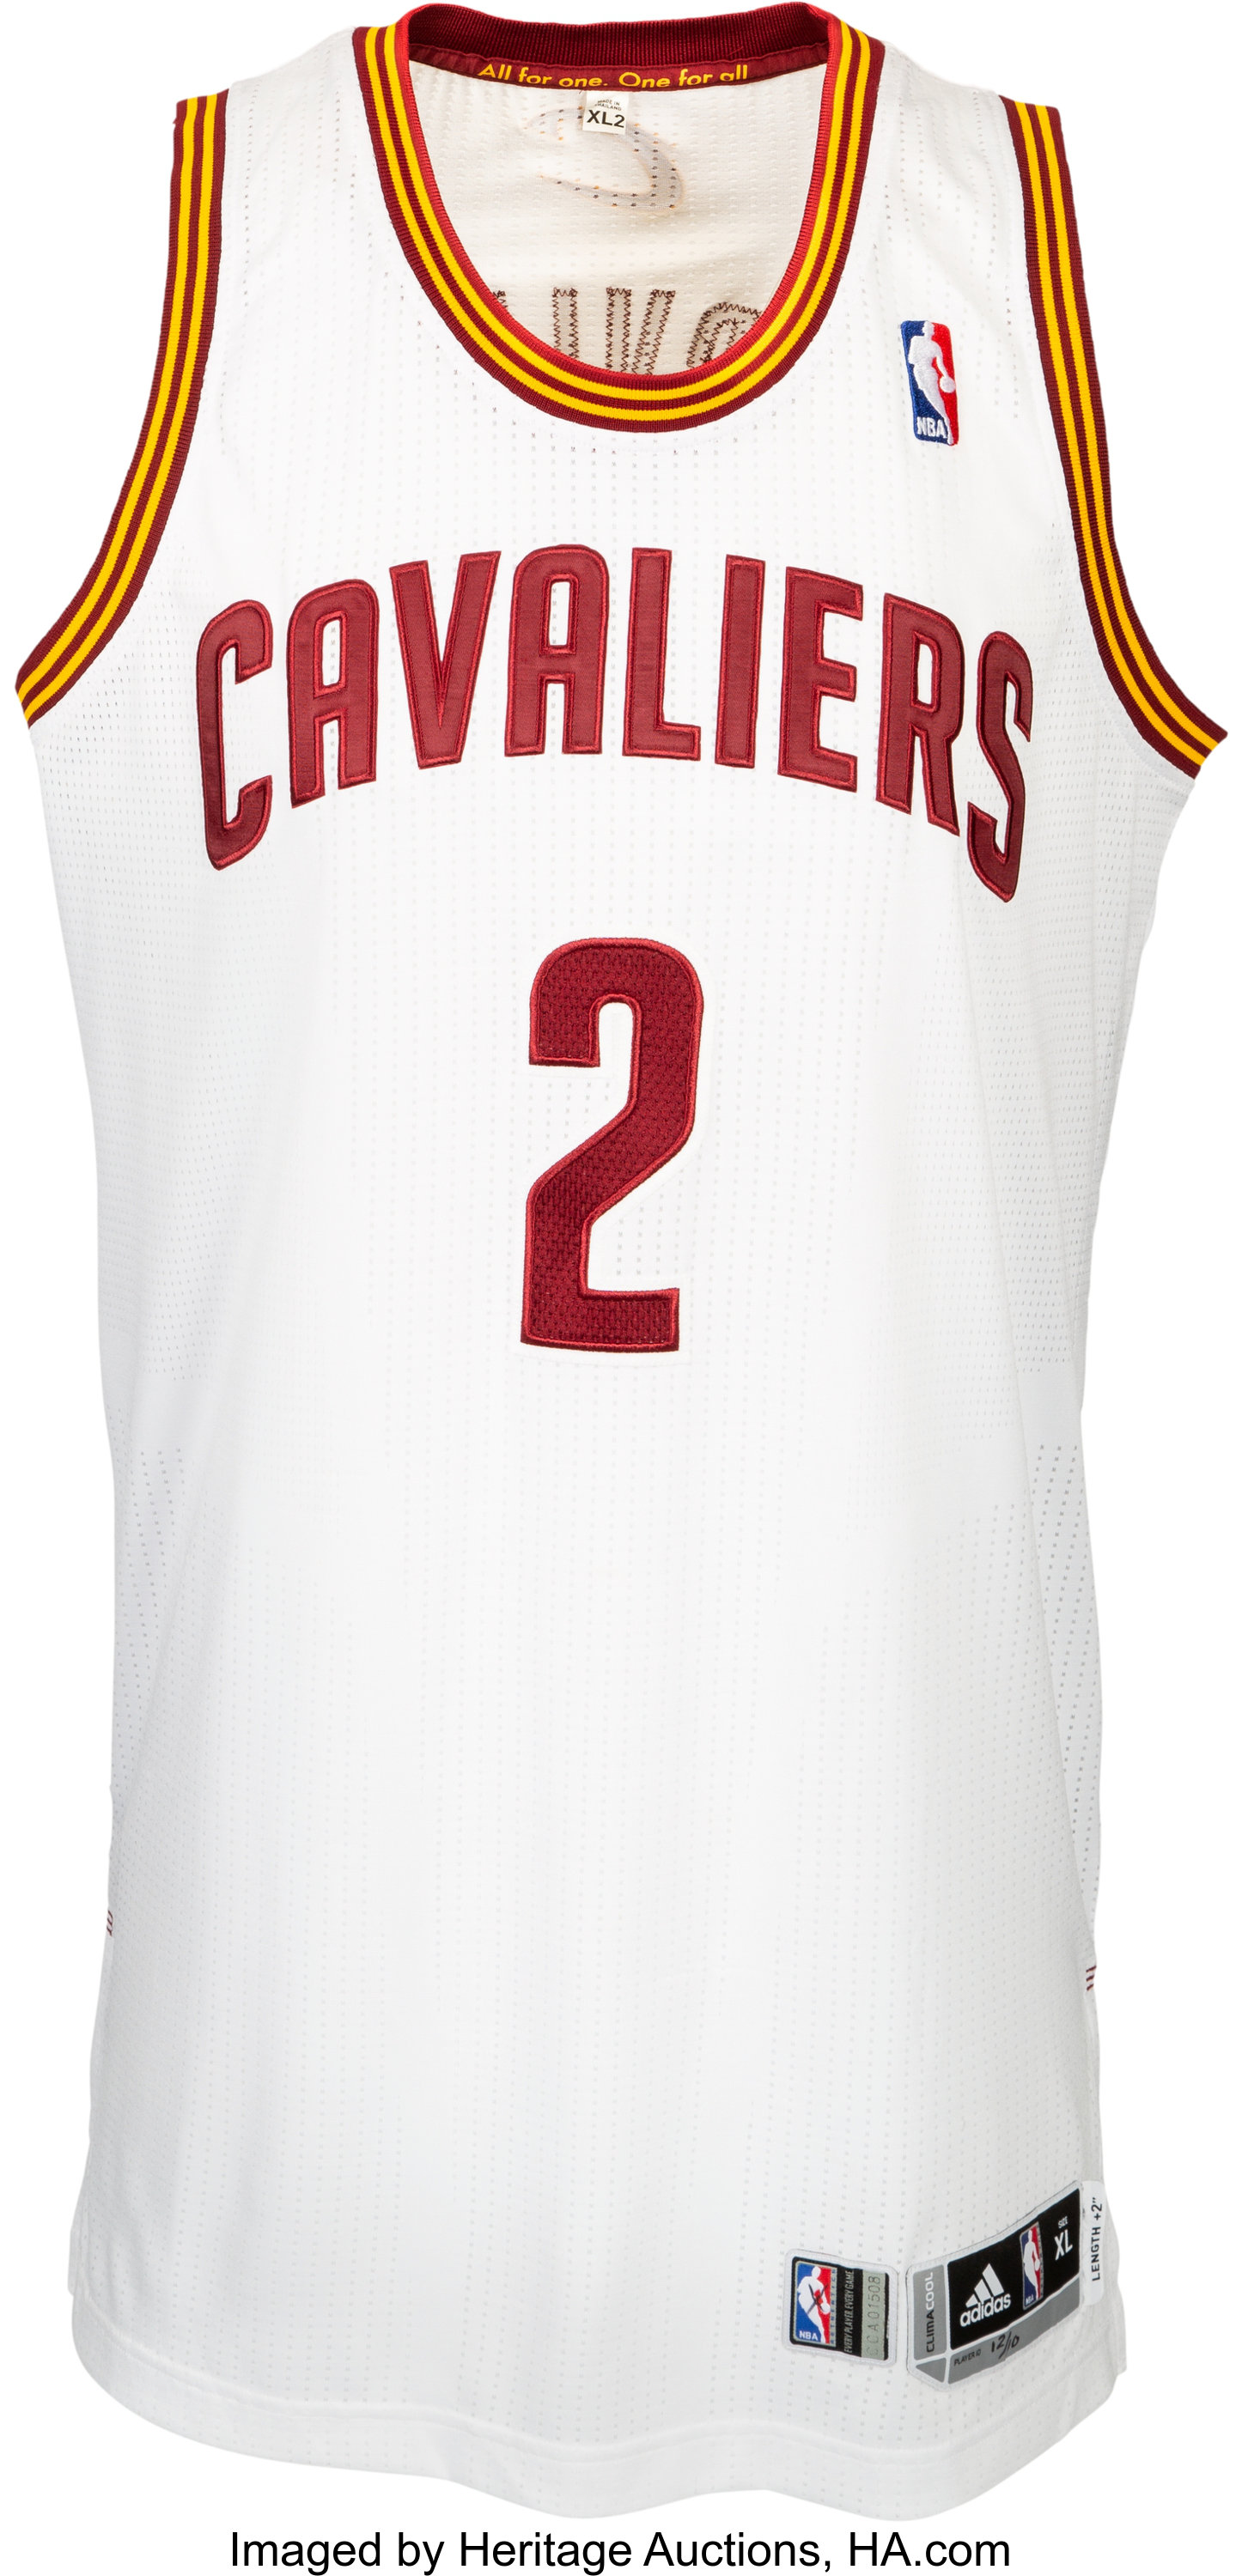 Kyrie Irving Cleveland Cavaliers adidas Net Number T-Shirt - White